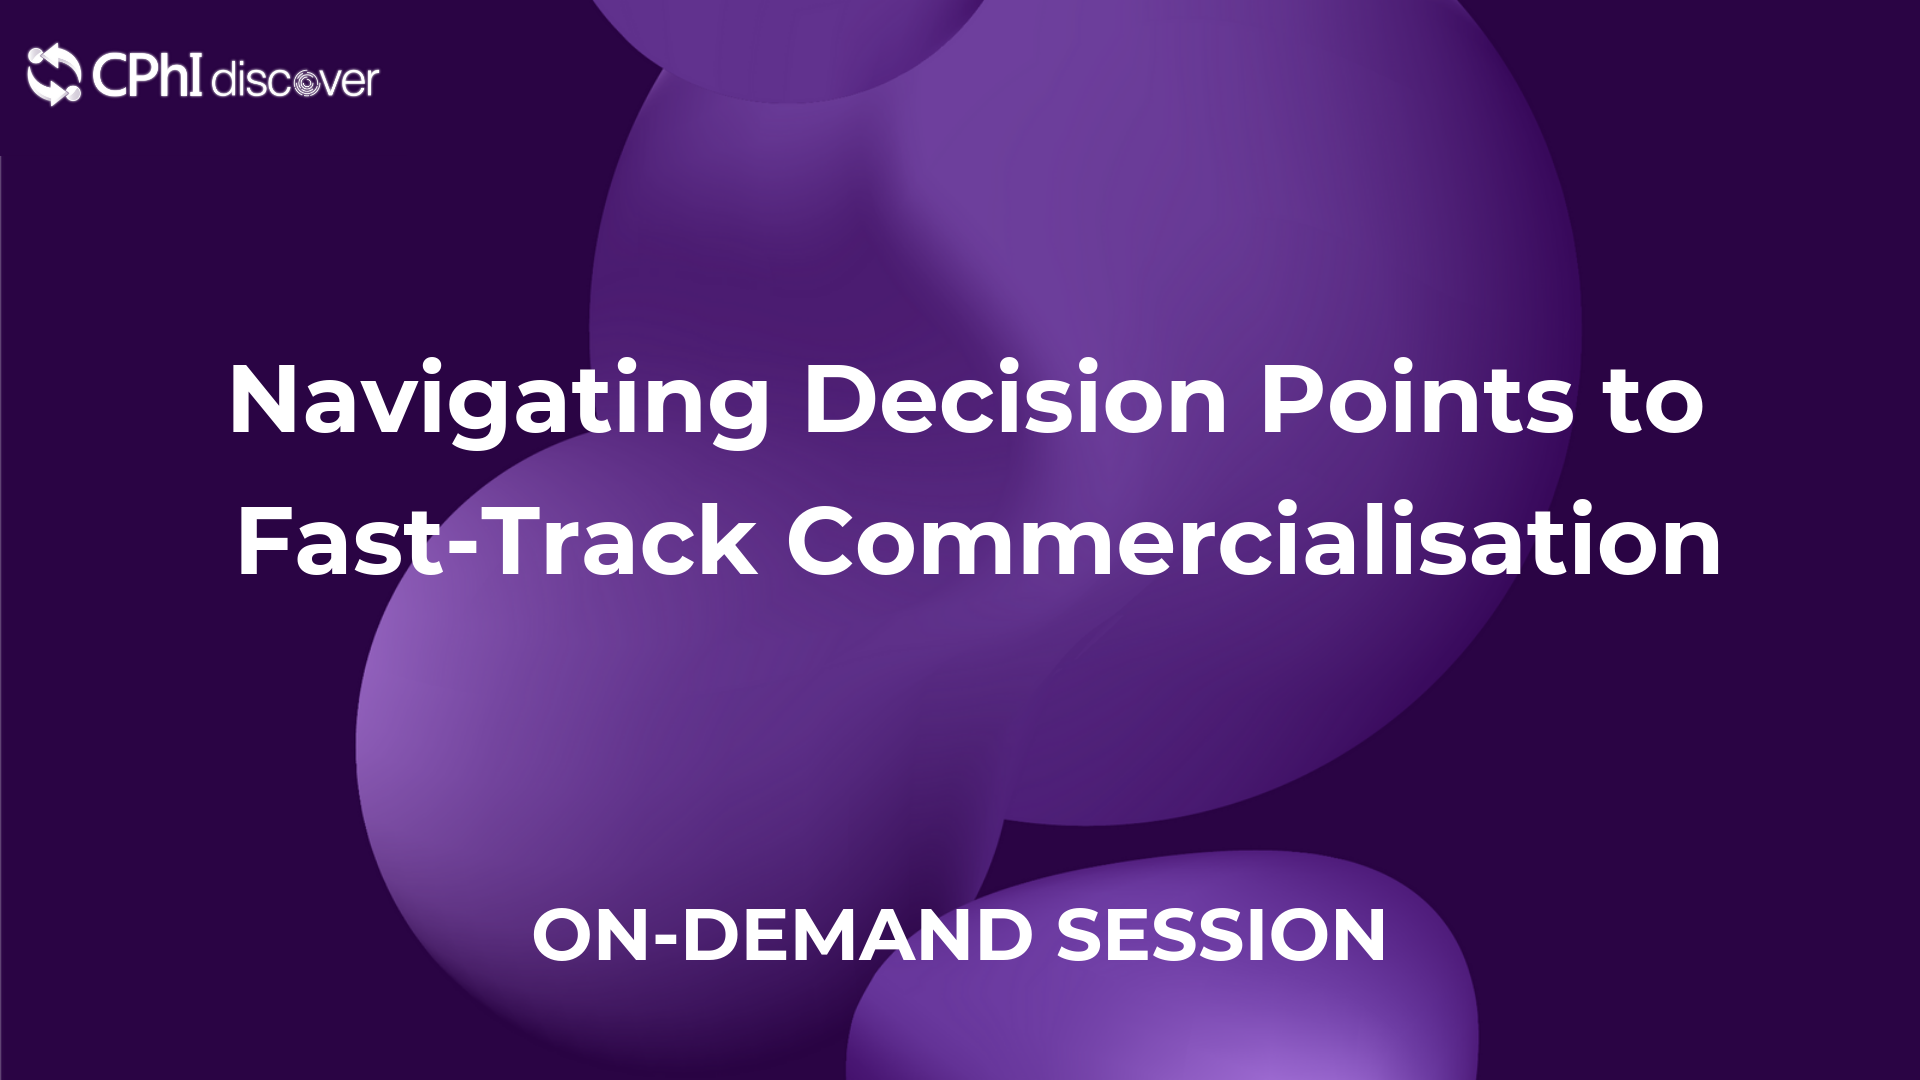 Navigating Decision Points to Fast-Track Commercialisation